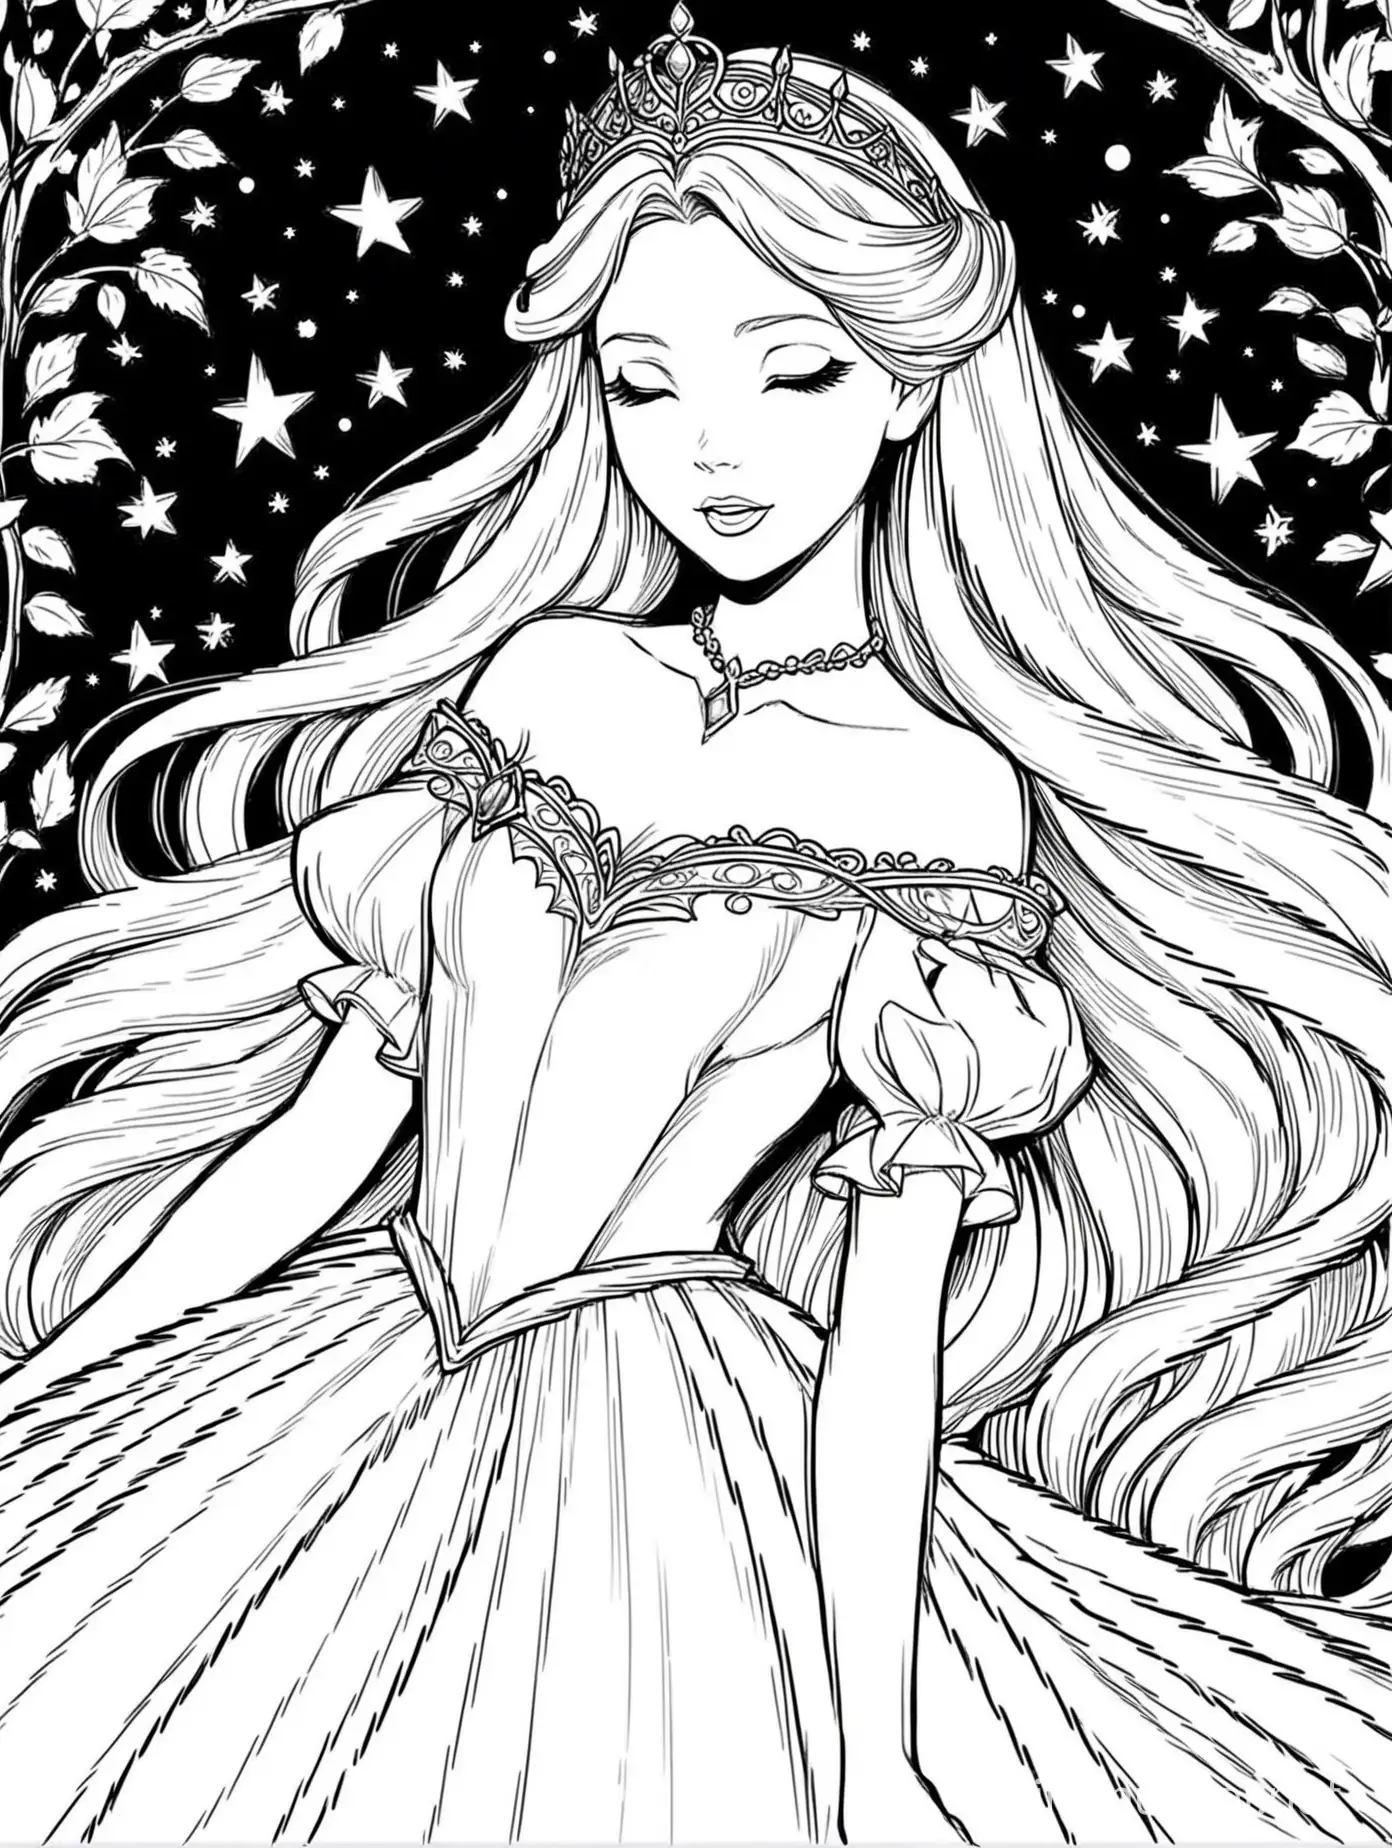 disney princess aurora the sleeping beauty, black and white for coloring book